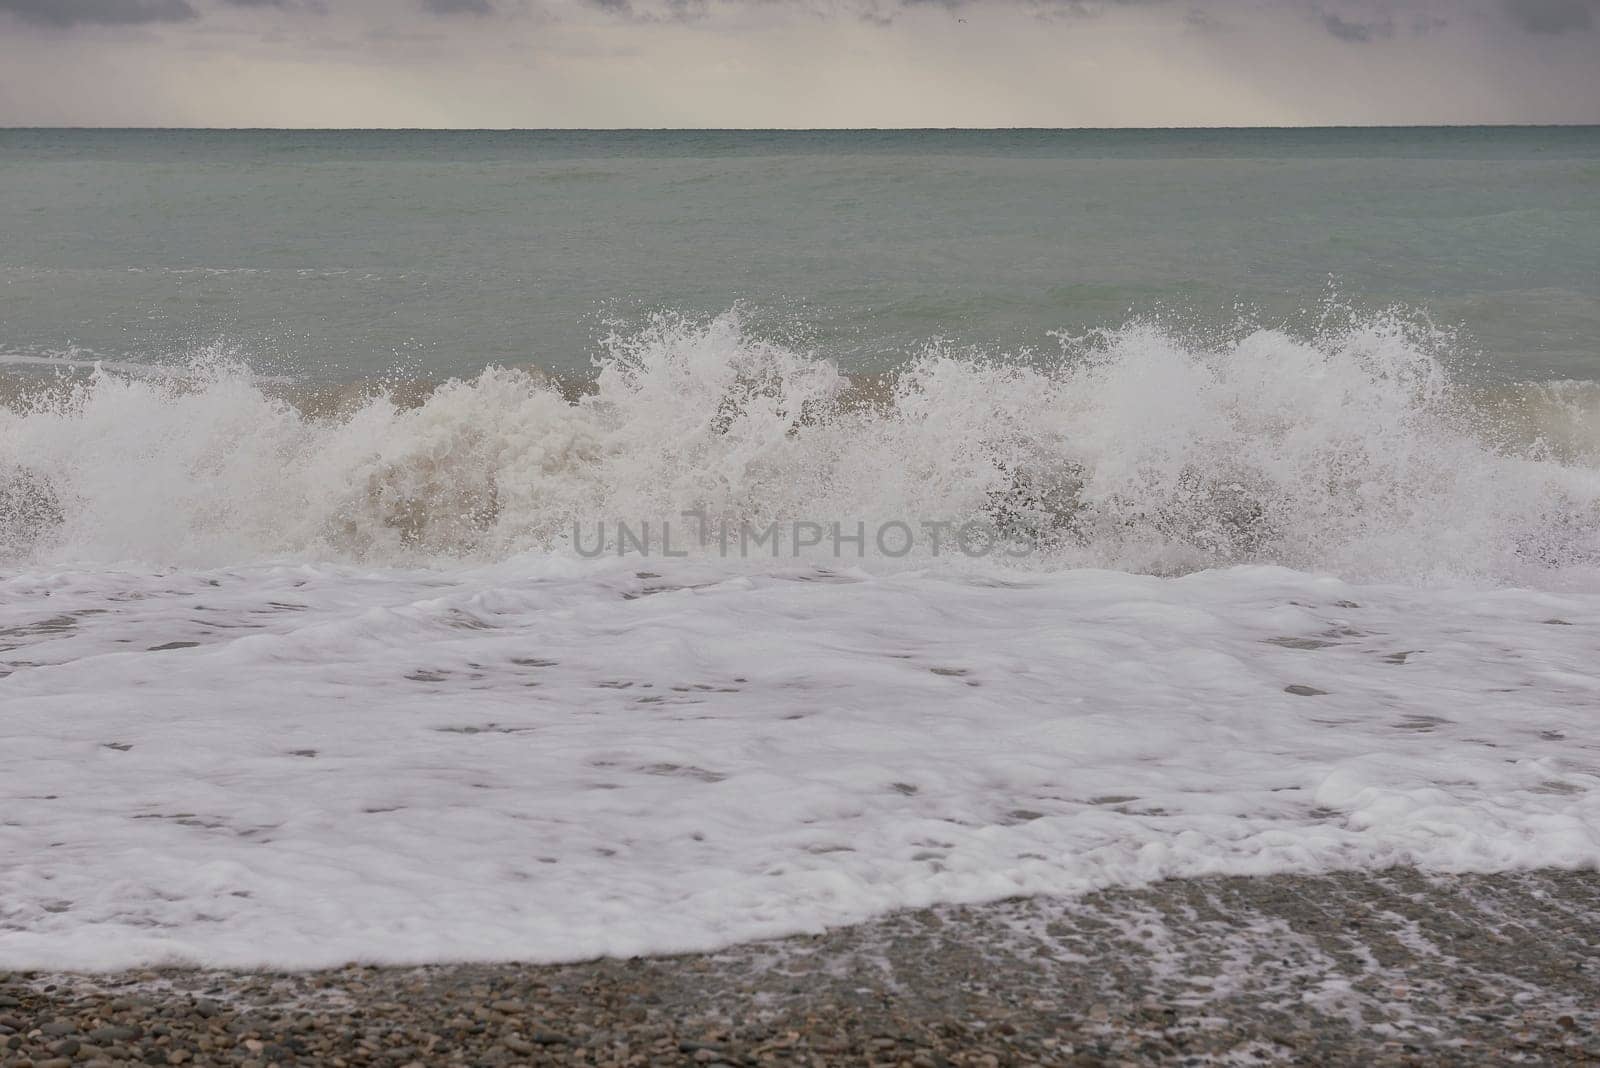 Waves breaking on the shore on small pebble beach. Storm clouds sky, turquoise water, waves,